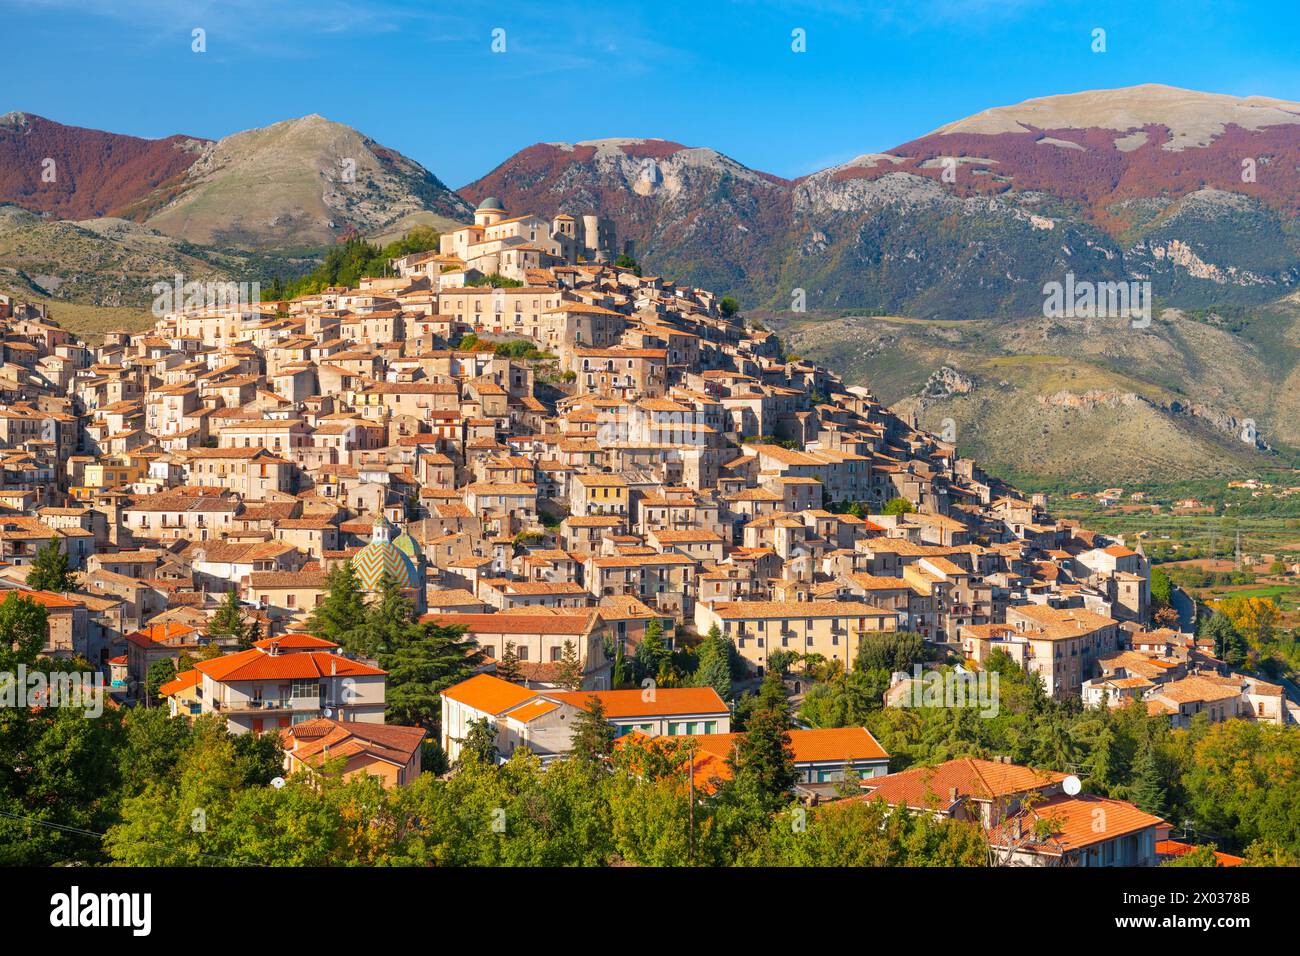 Morano Calabro, Italy hilltop town in the province of Cosenza in the Calabria region. Stock Photo